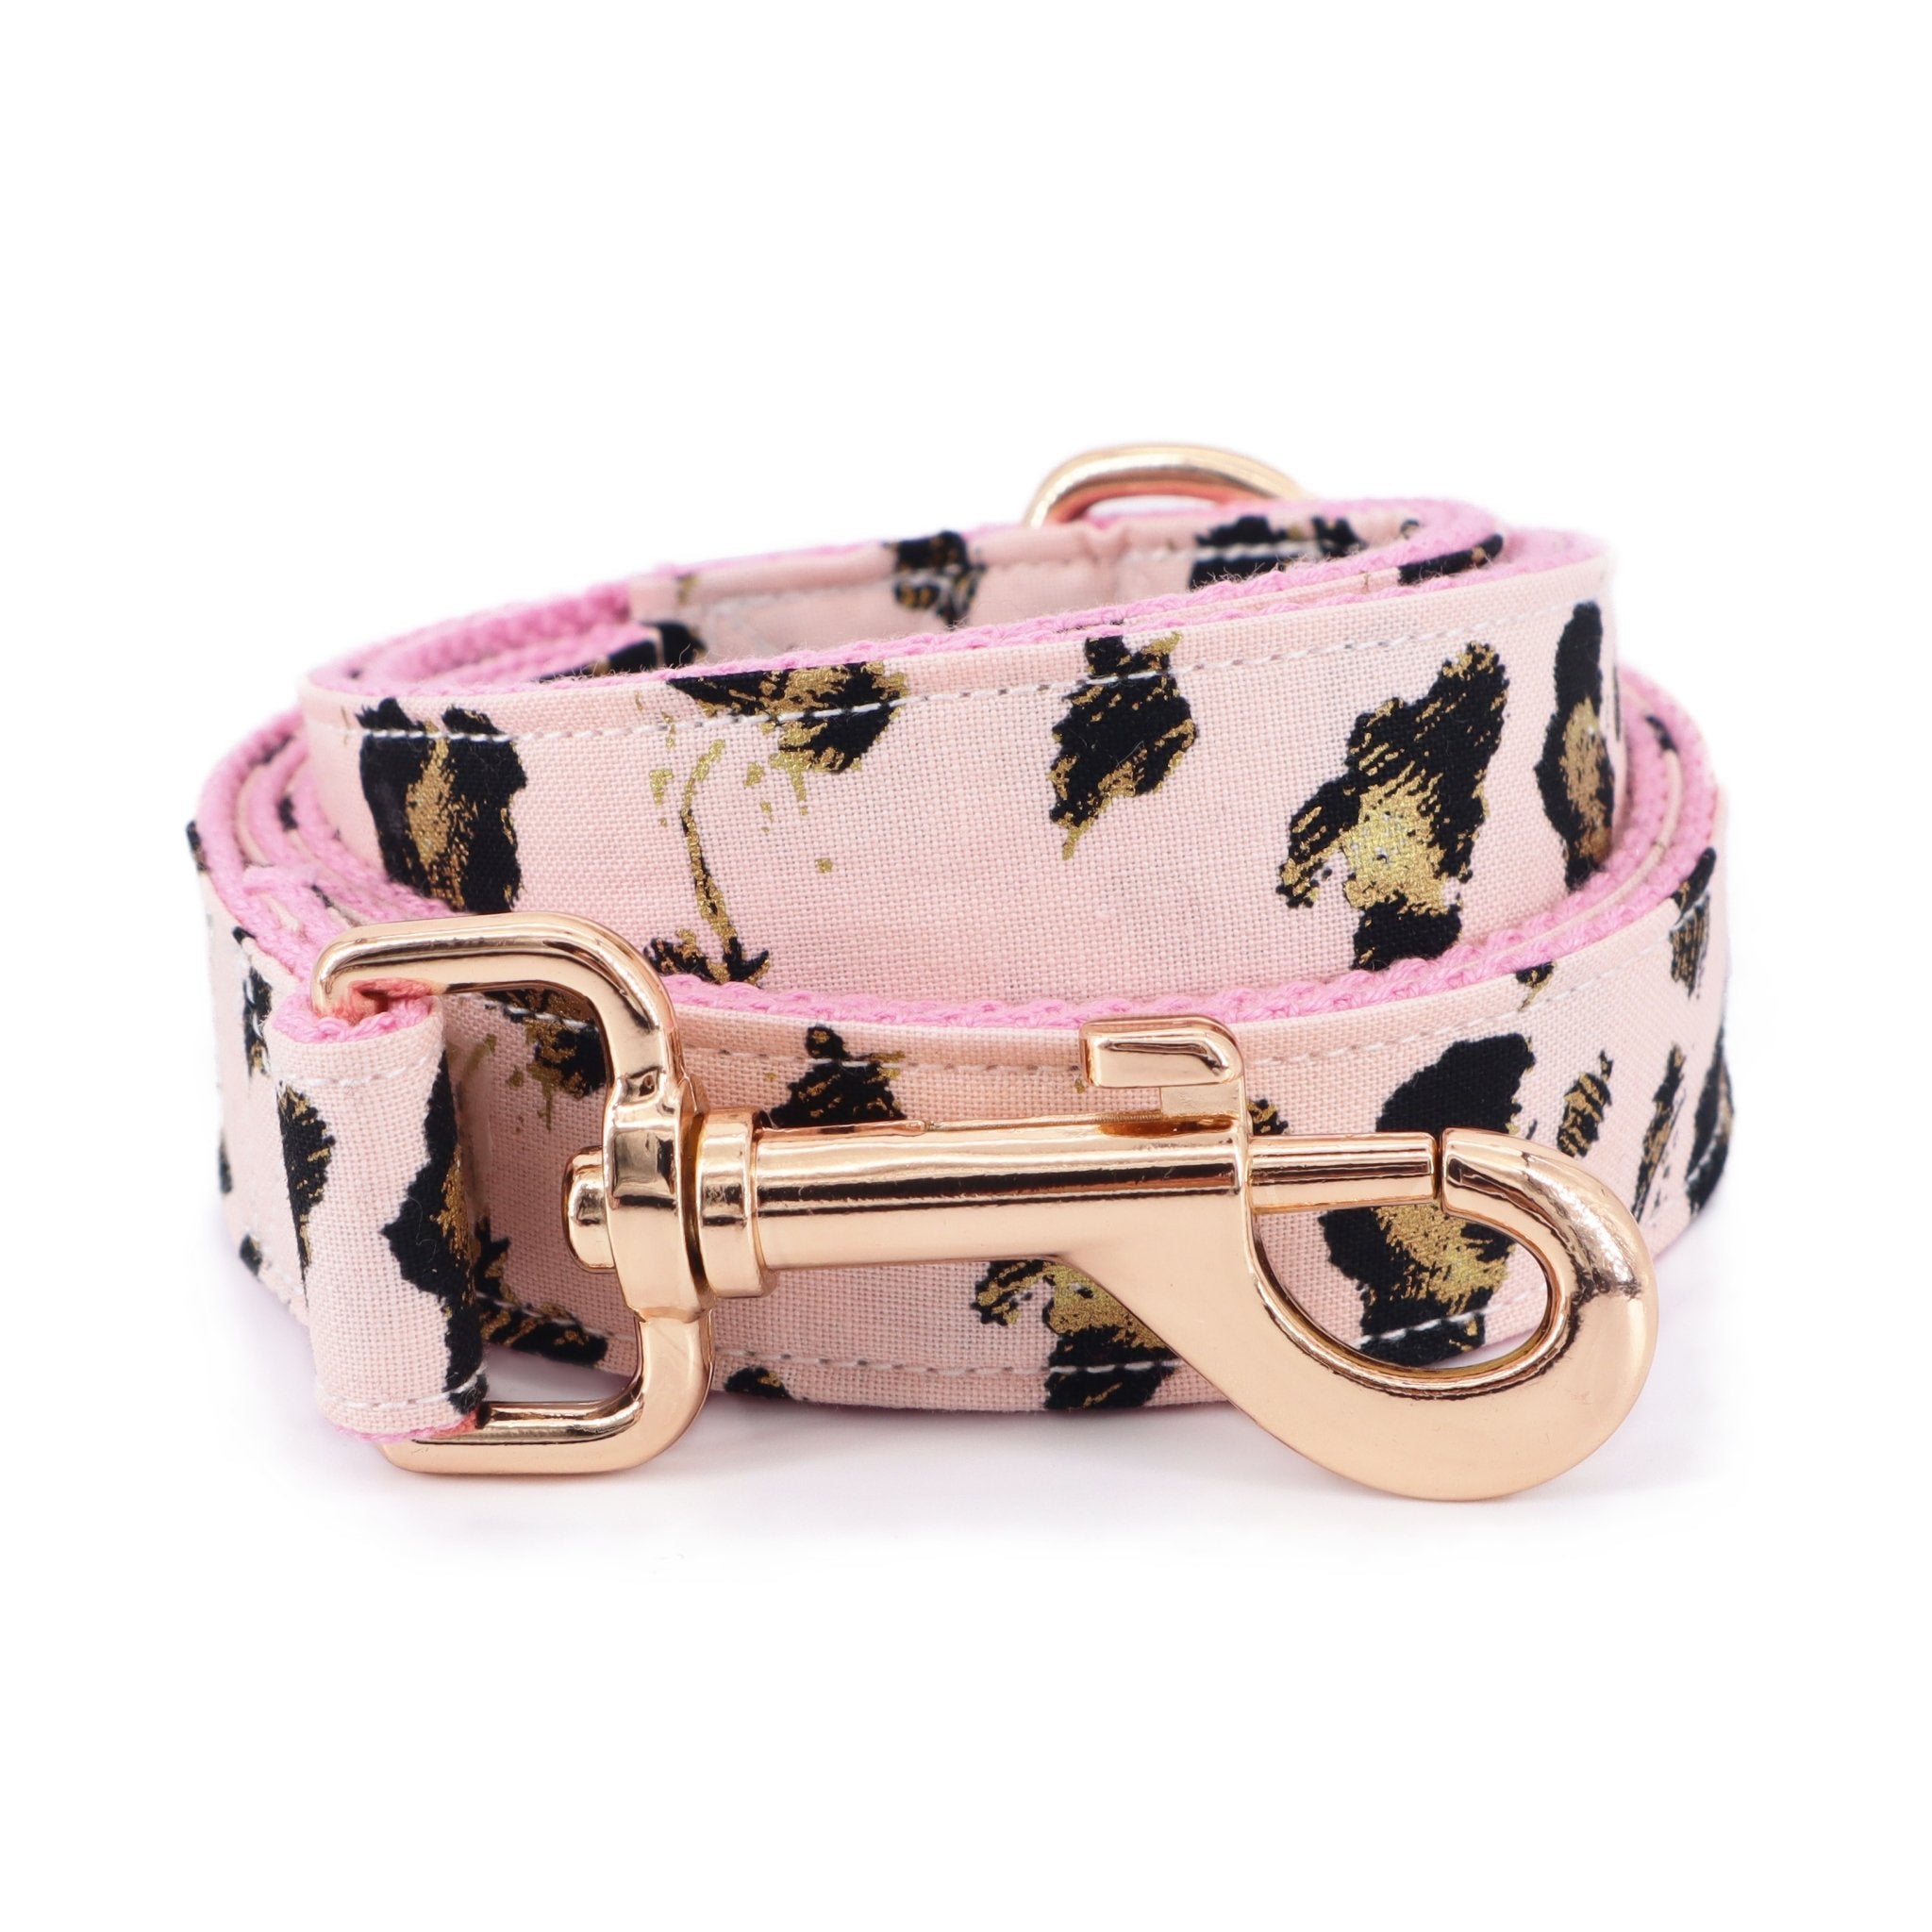 Chewy Vuitton Dog Collar & Lead With Bow